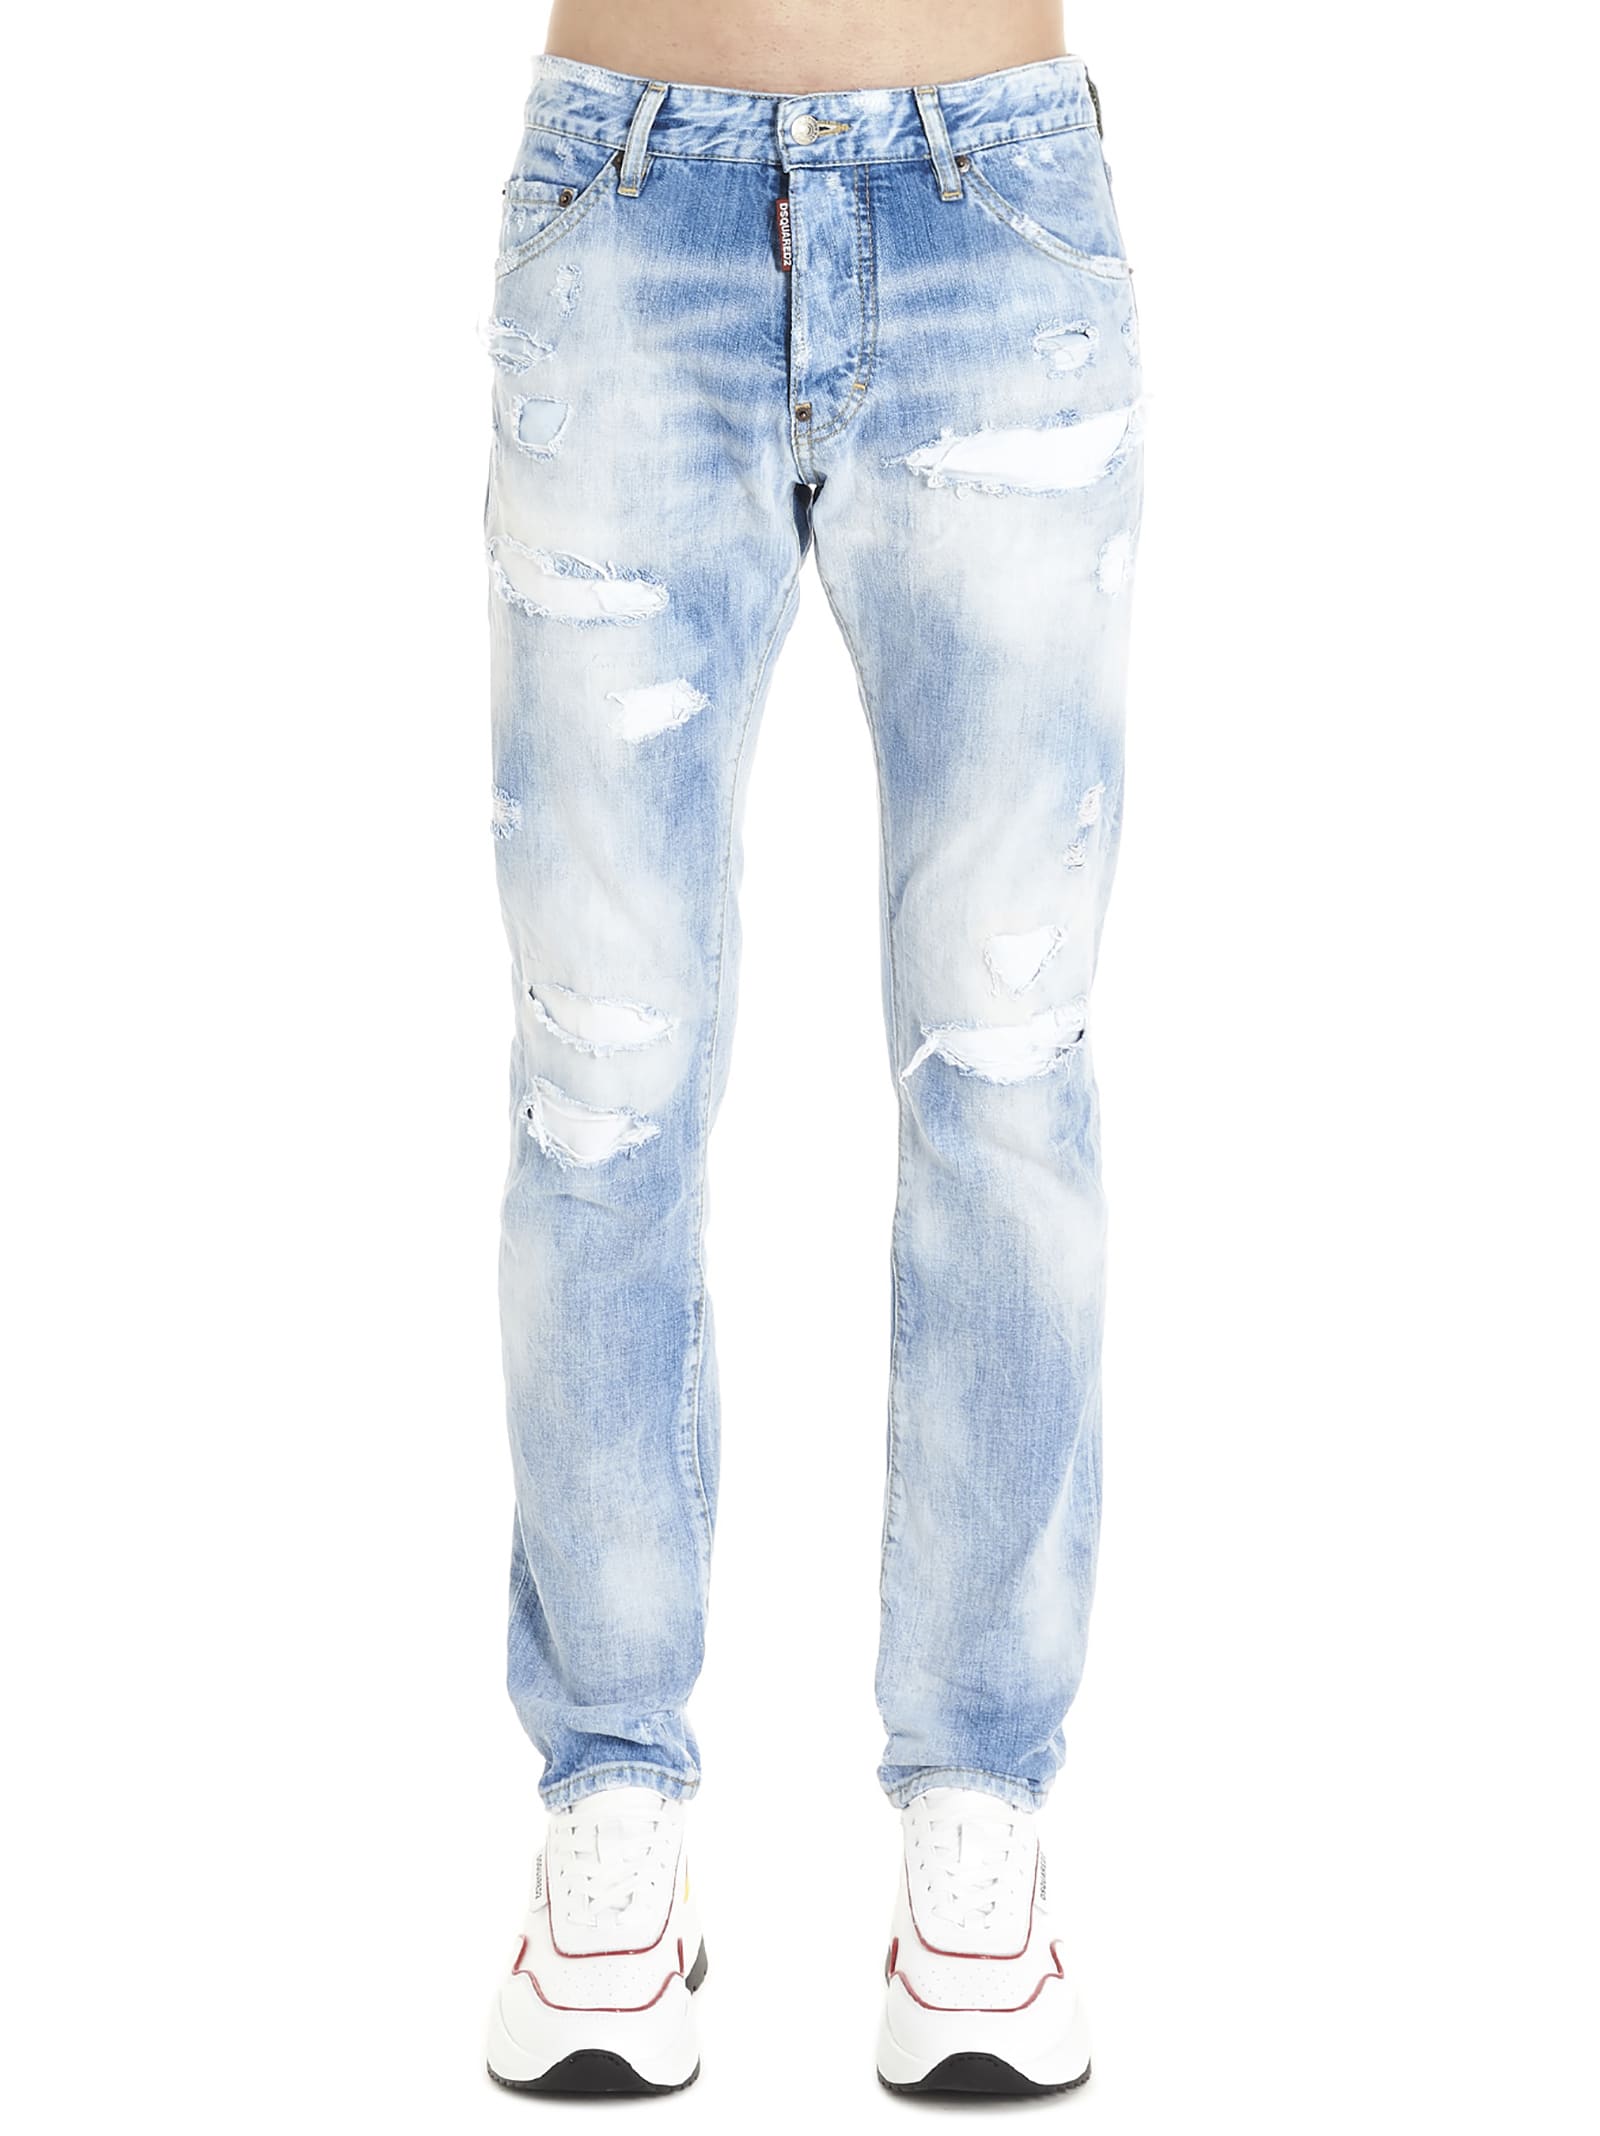 dsquared2 cool guy jeans sale